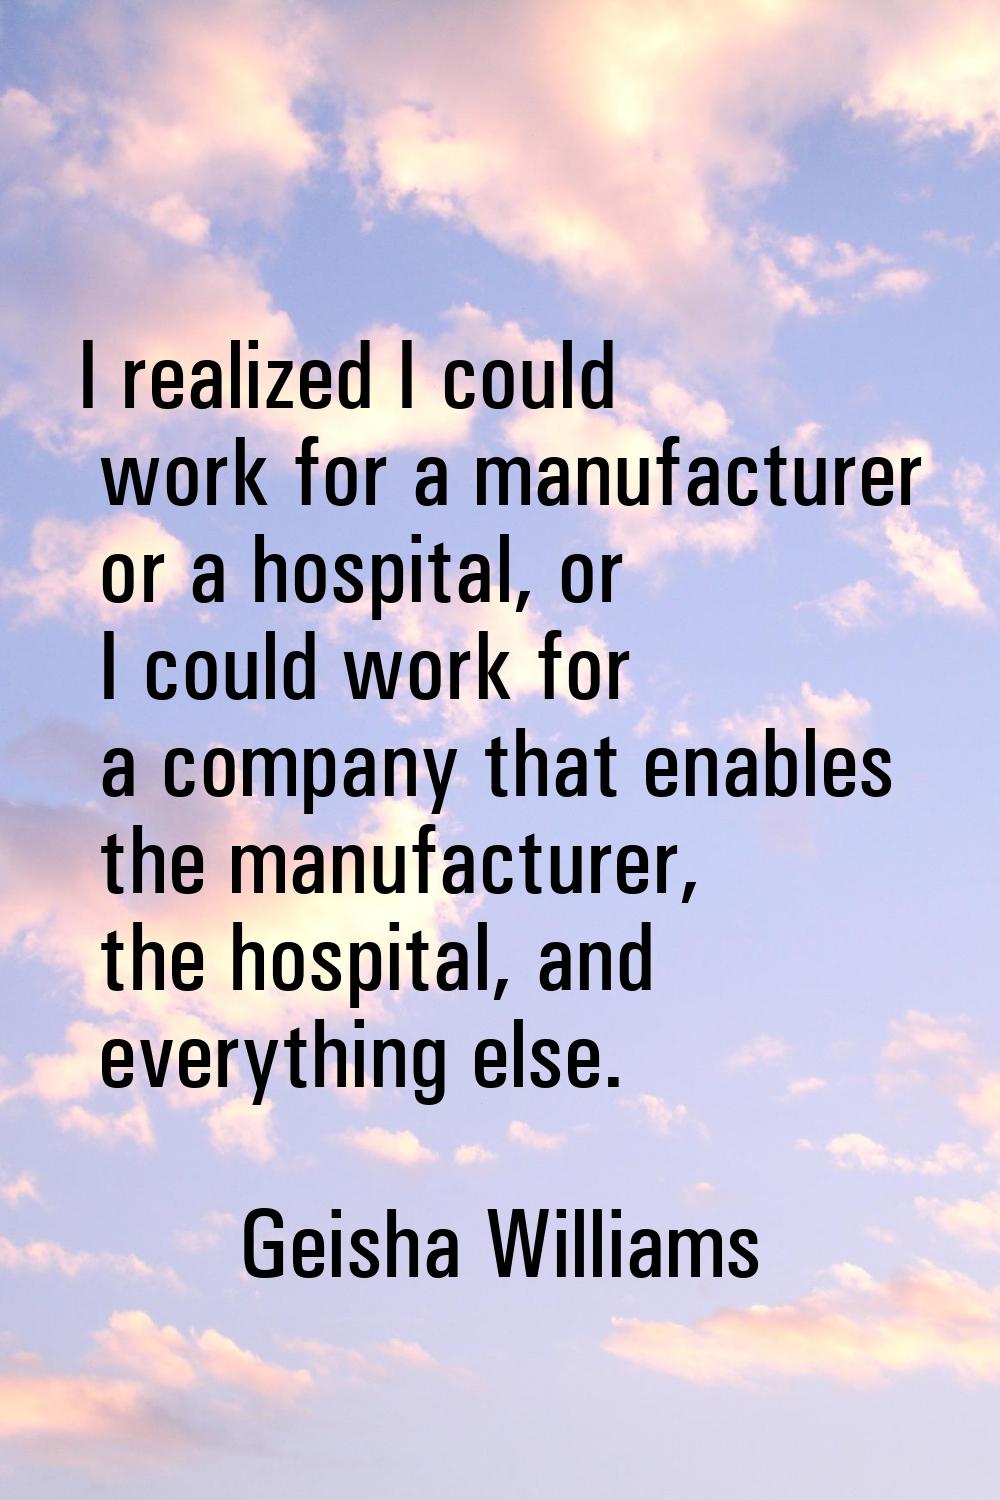 I realized I could work for a manufacturer or a hospital, or I could work for a company that enable